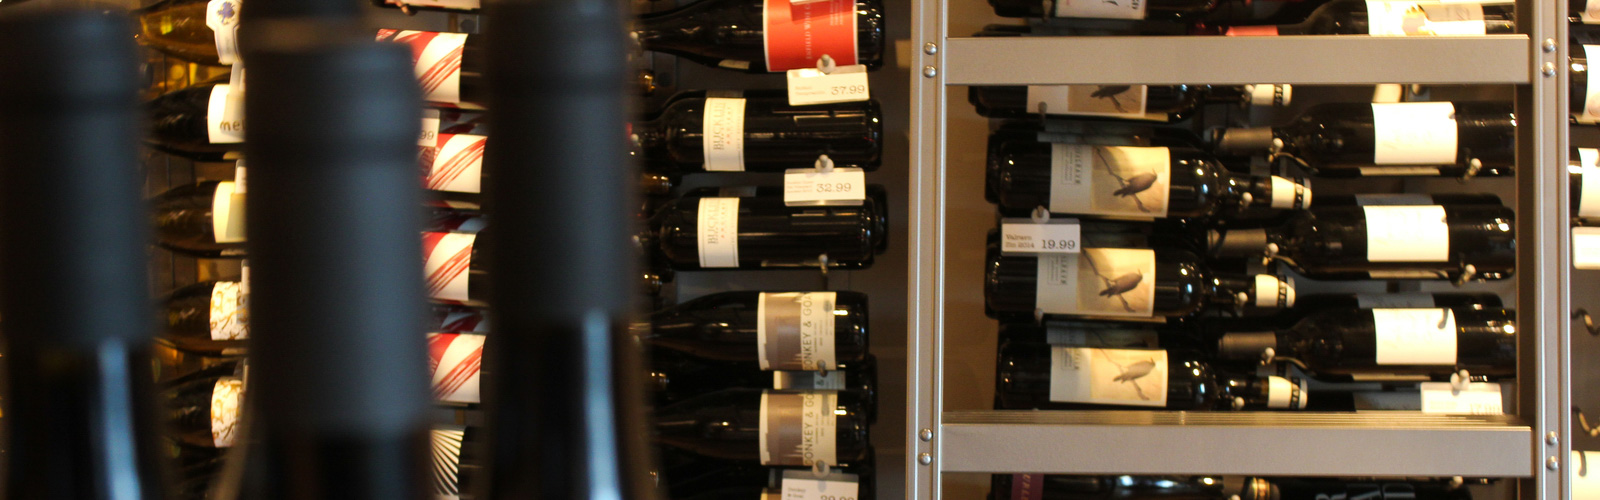 Winkler & Samuels shares its passion for wine through classes, its wine cellar, and a retail store.